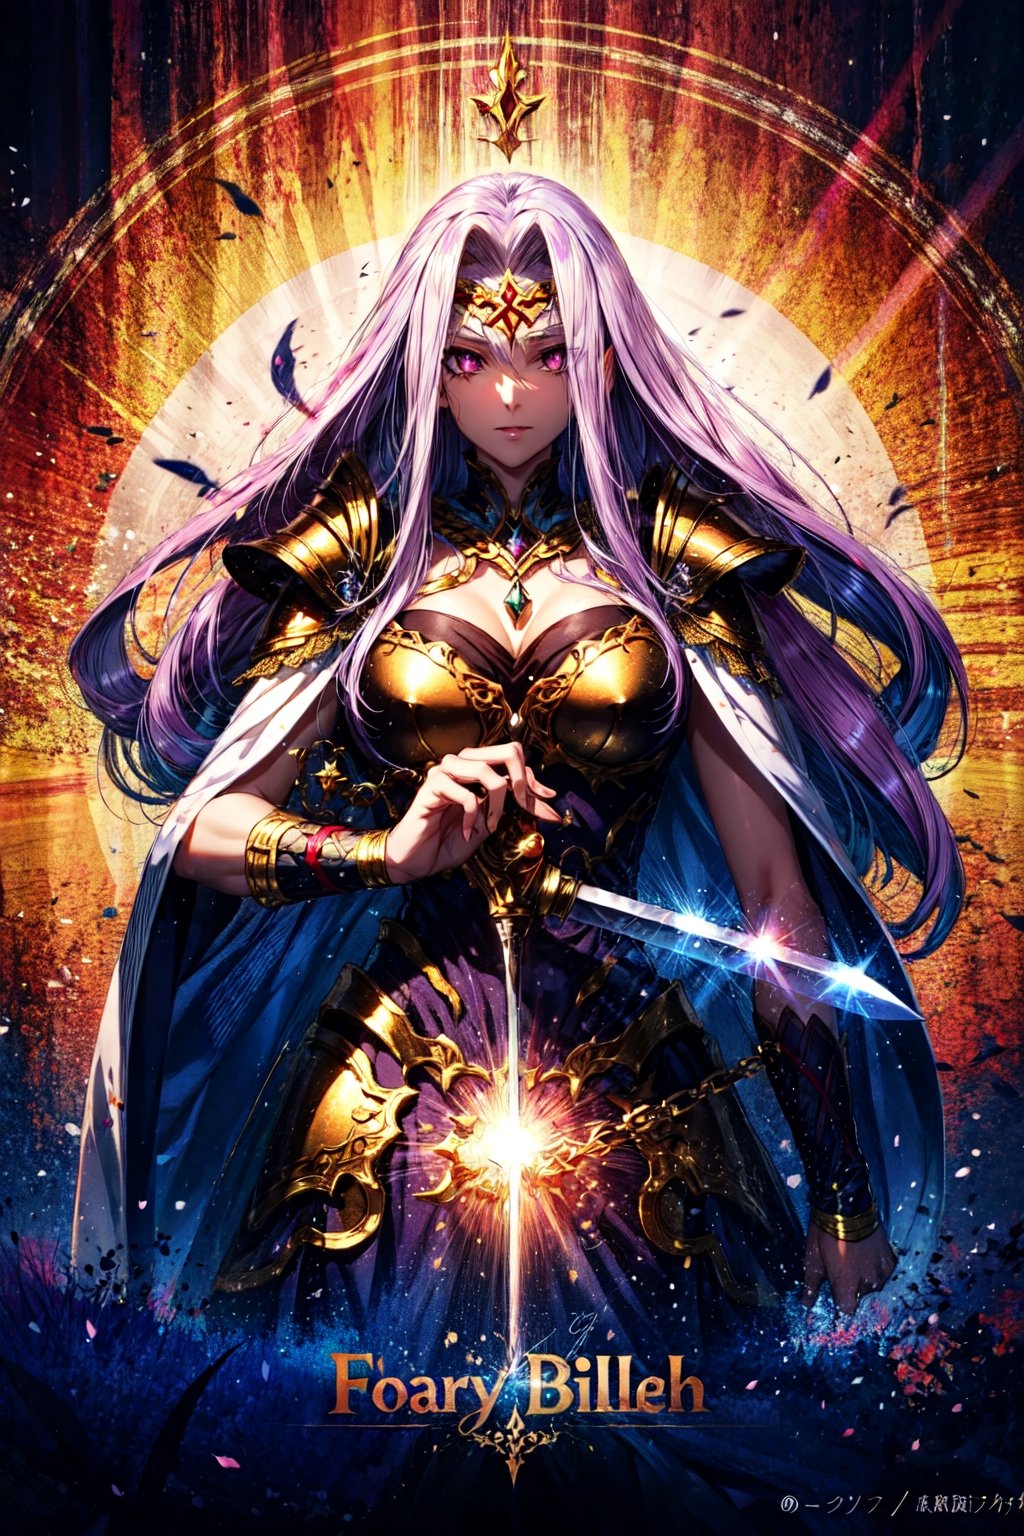  gorgon \(fate\), slit pupils, looking at viewer, hair flowing over, huge breasts, a woman with a sword in her hand, dark phantasy, wallpaper for monitor, royal bird, loundraw, glorious long purple hair, wearing bullet-riddled armor, masked female violinists, no watermark signature, pharaoh, brawl, illustration - n 9, clear image, gwyn,Circle